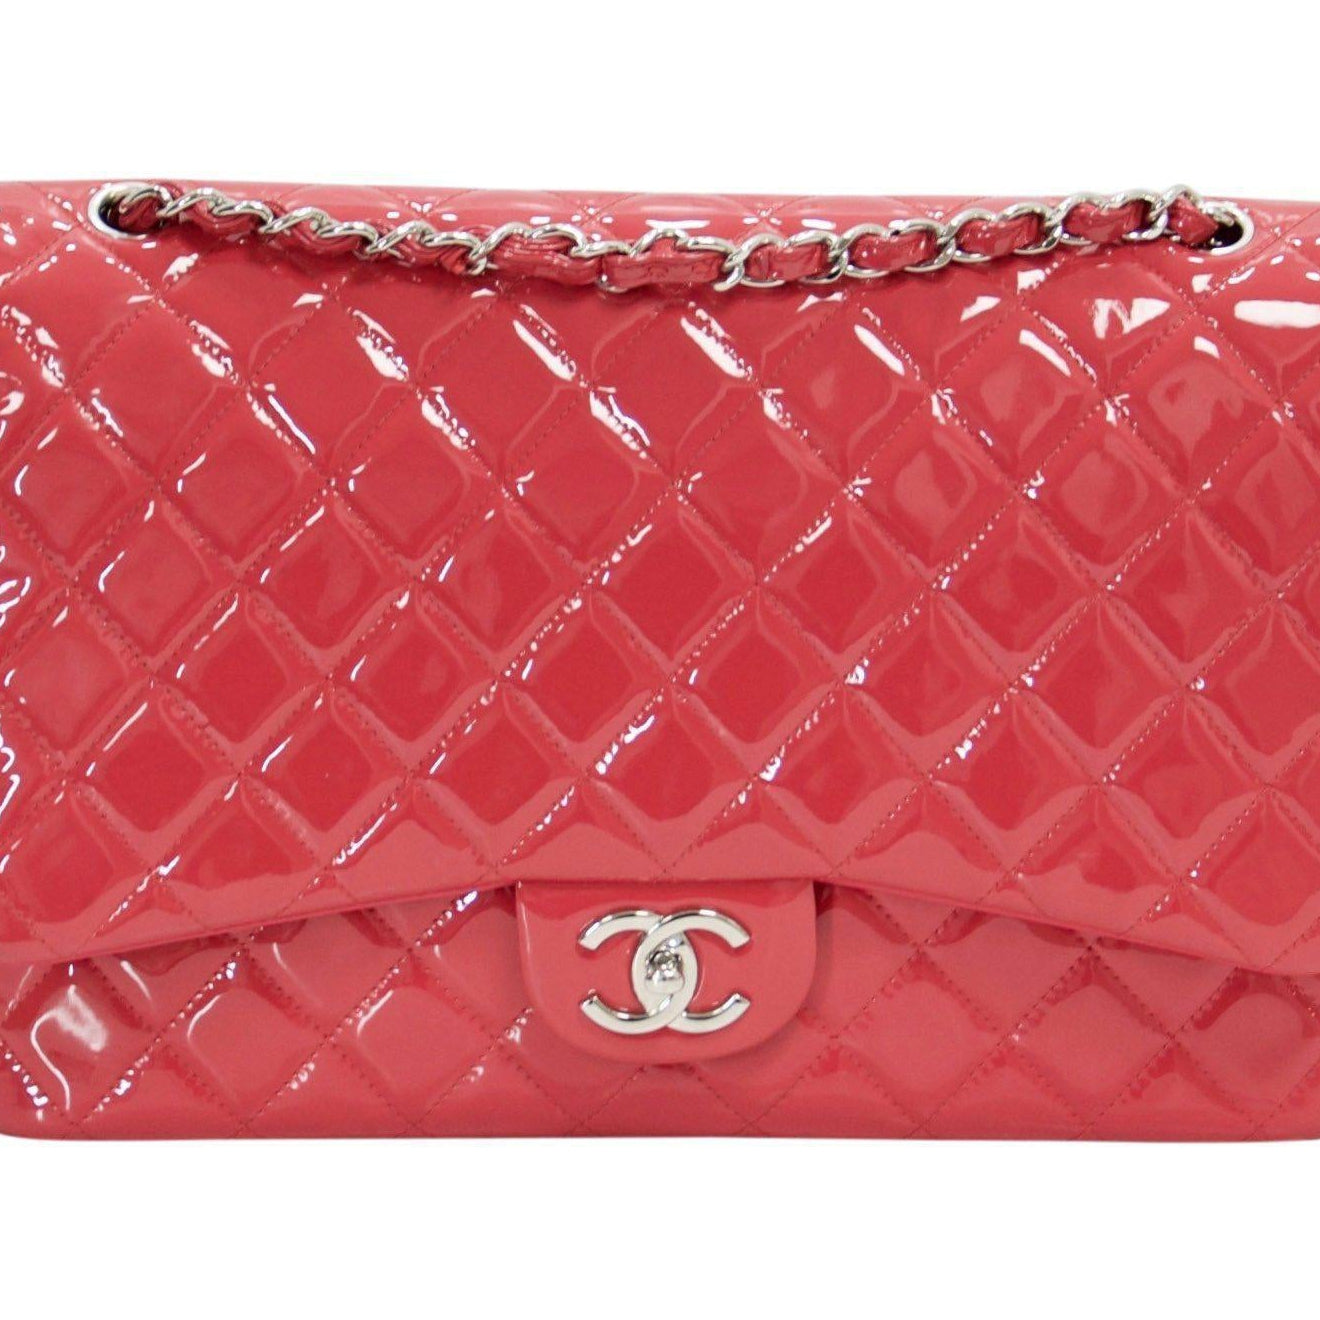 Lot - CHANEL PINK PATENT LEATHER DOUBLE FLAP BAG